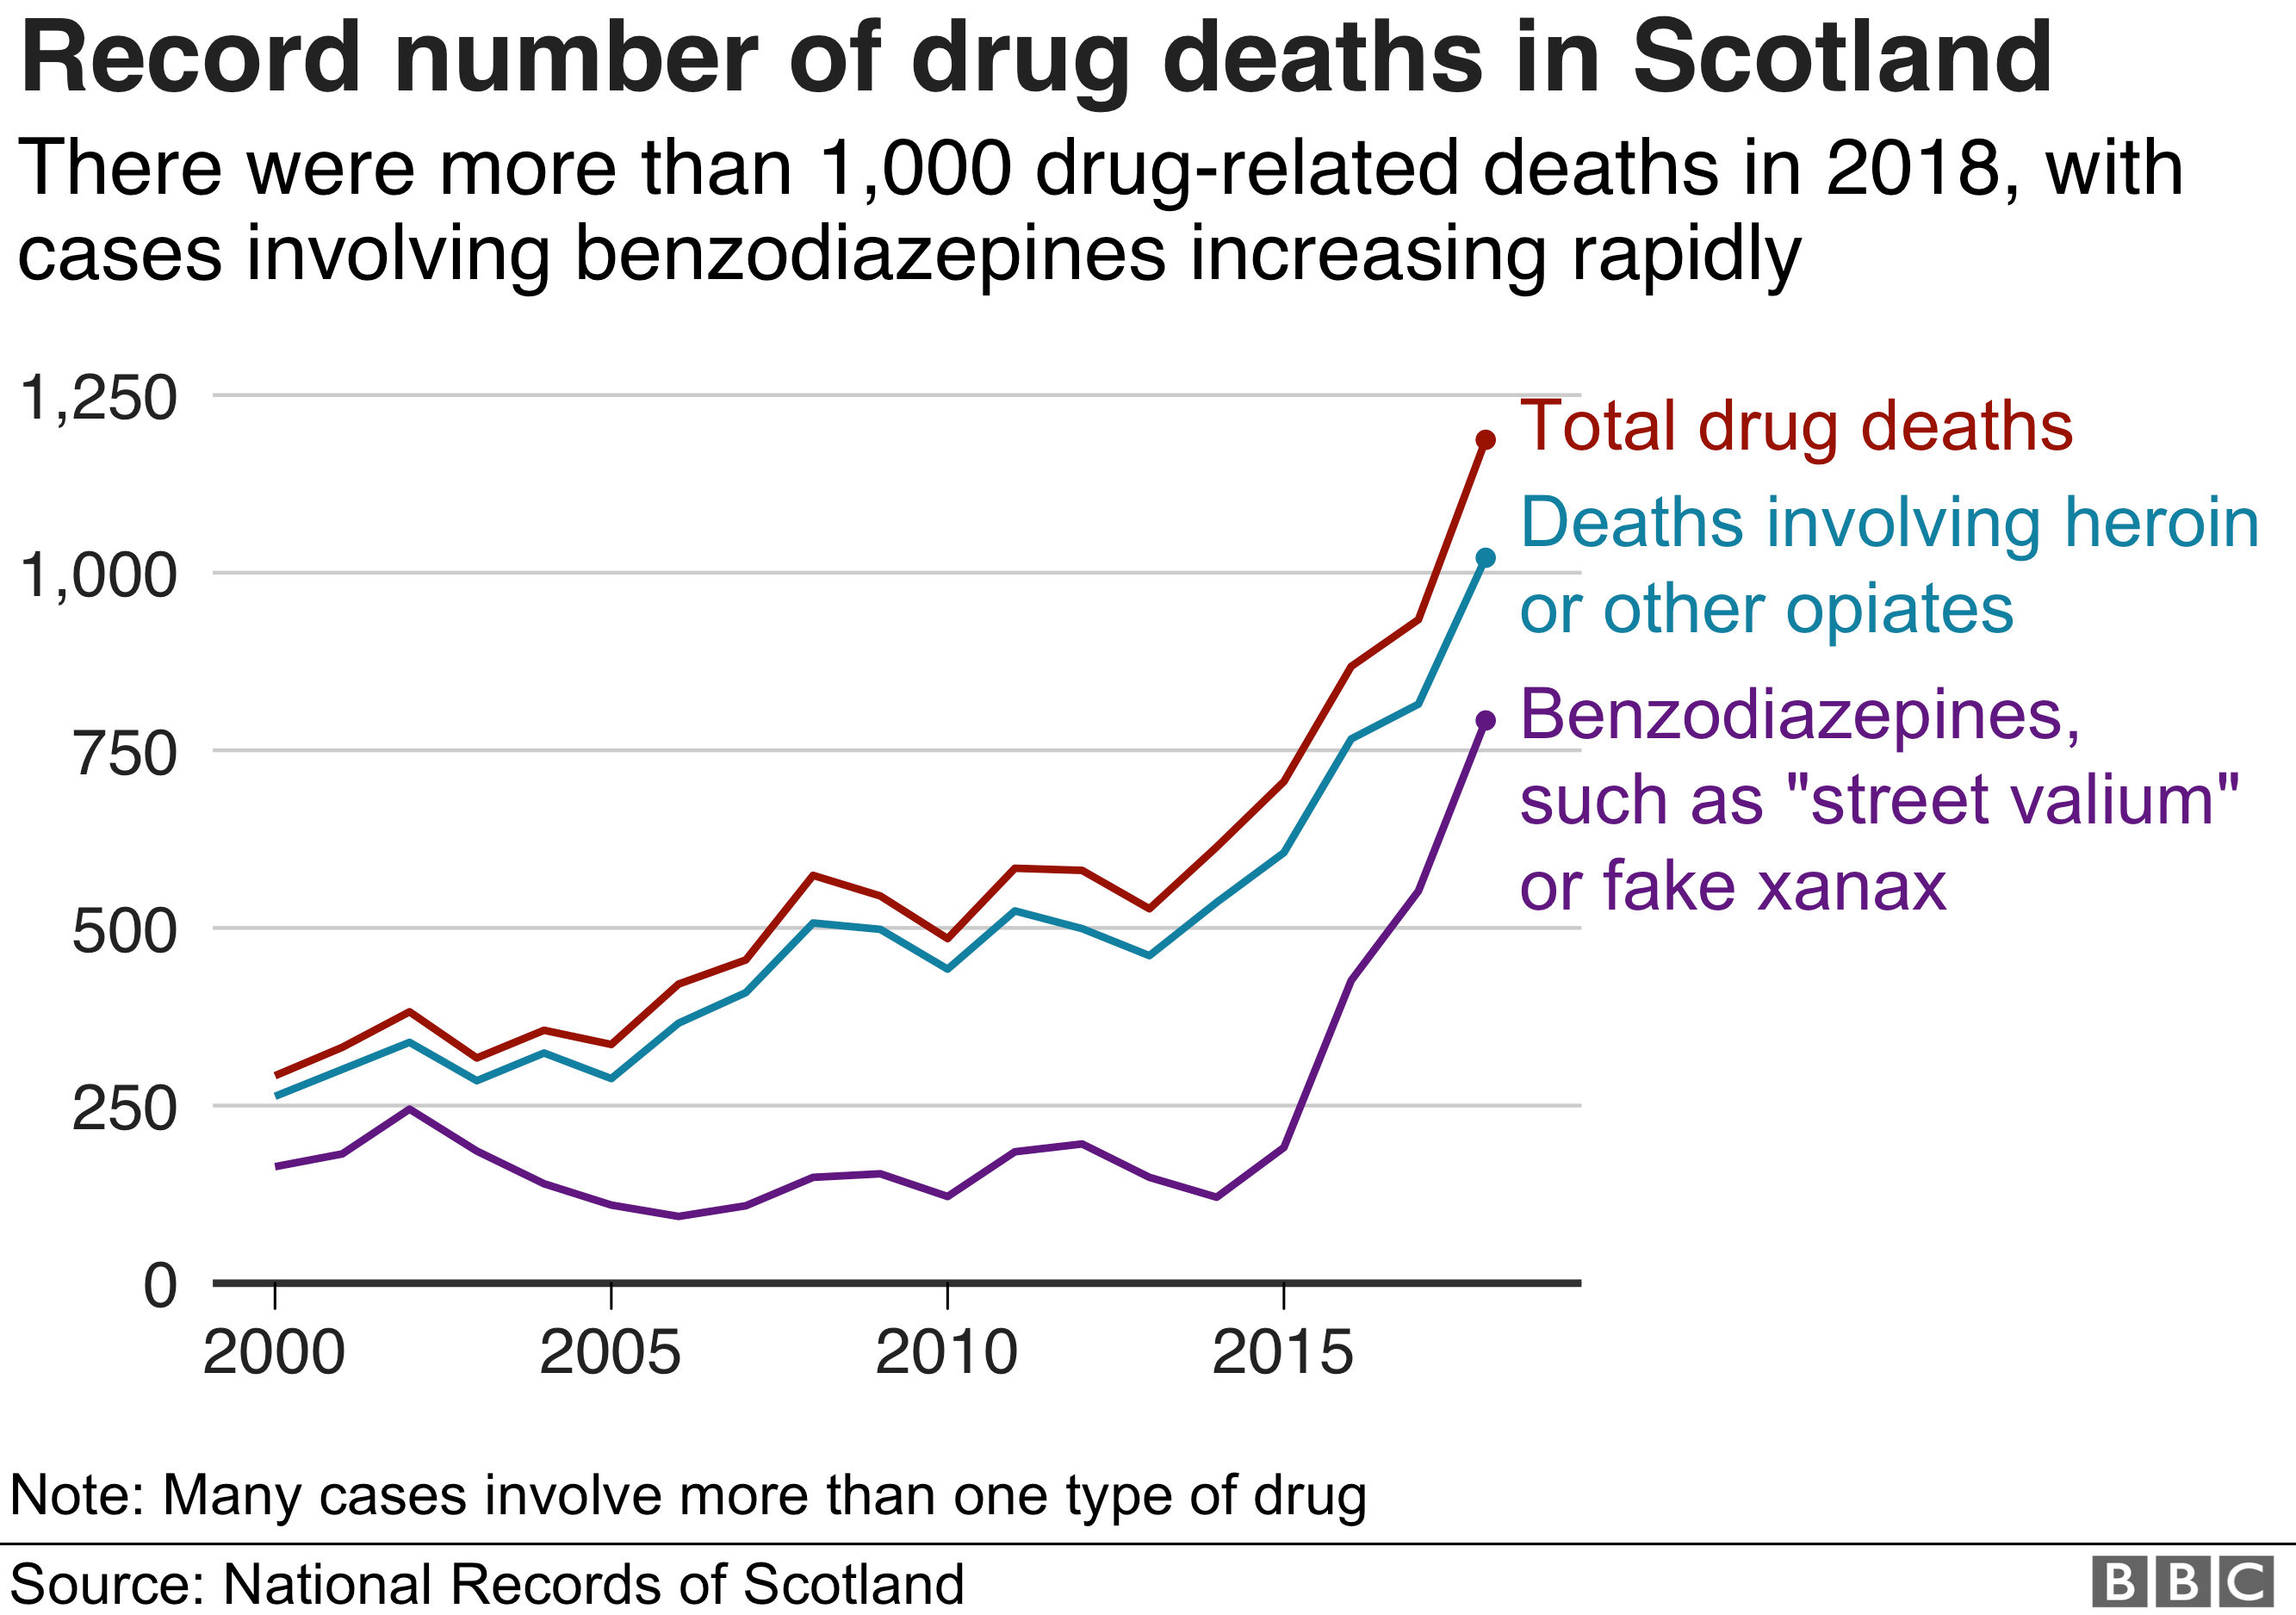 The number of drugs deaths in Scotland rose sharply again, above 1,000 for the first time. The number of deaths involving heroin was also over 1,000, from 840 last year. The number of deaths related to benzodiazepines was up to 797 from 555 in 2017